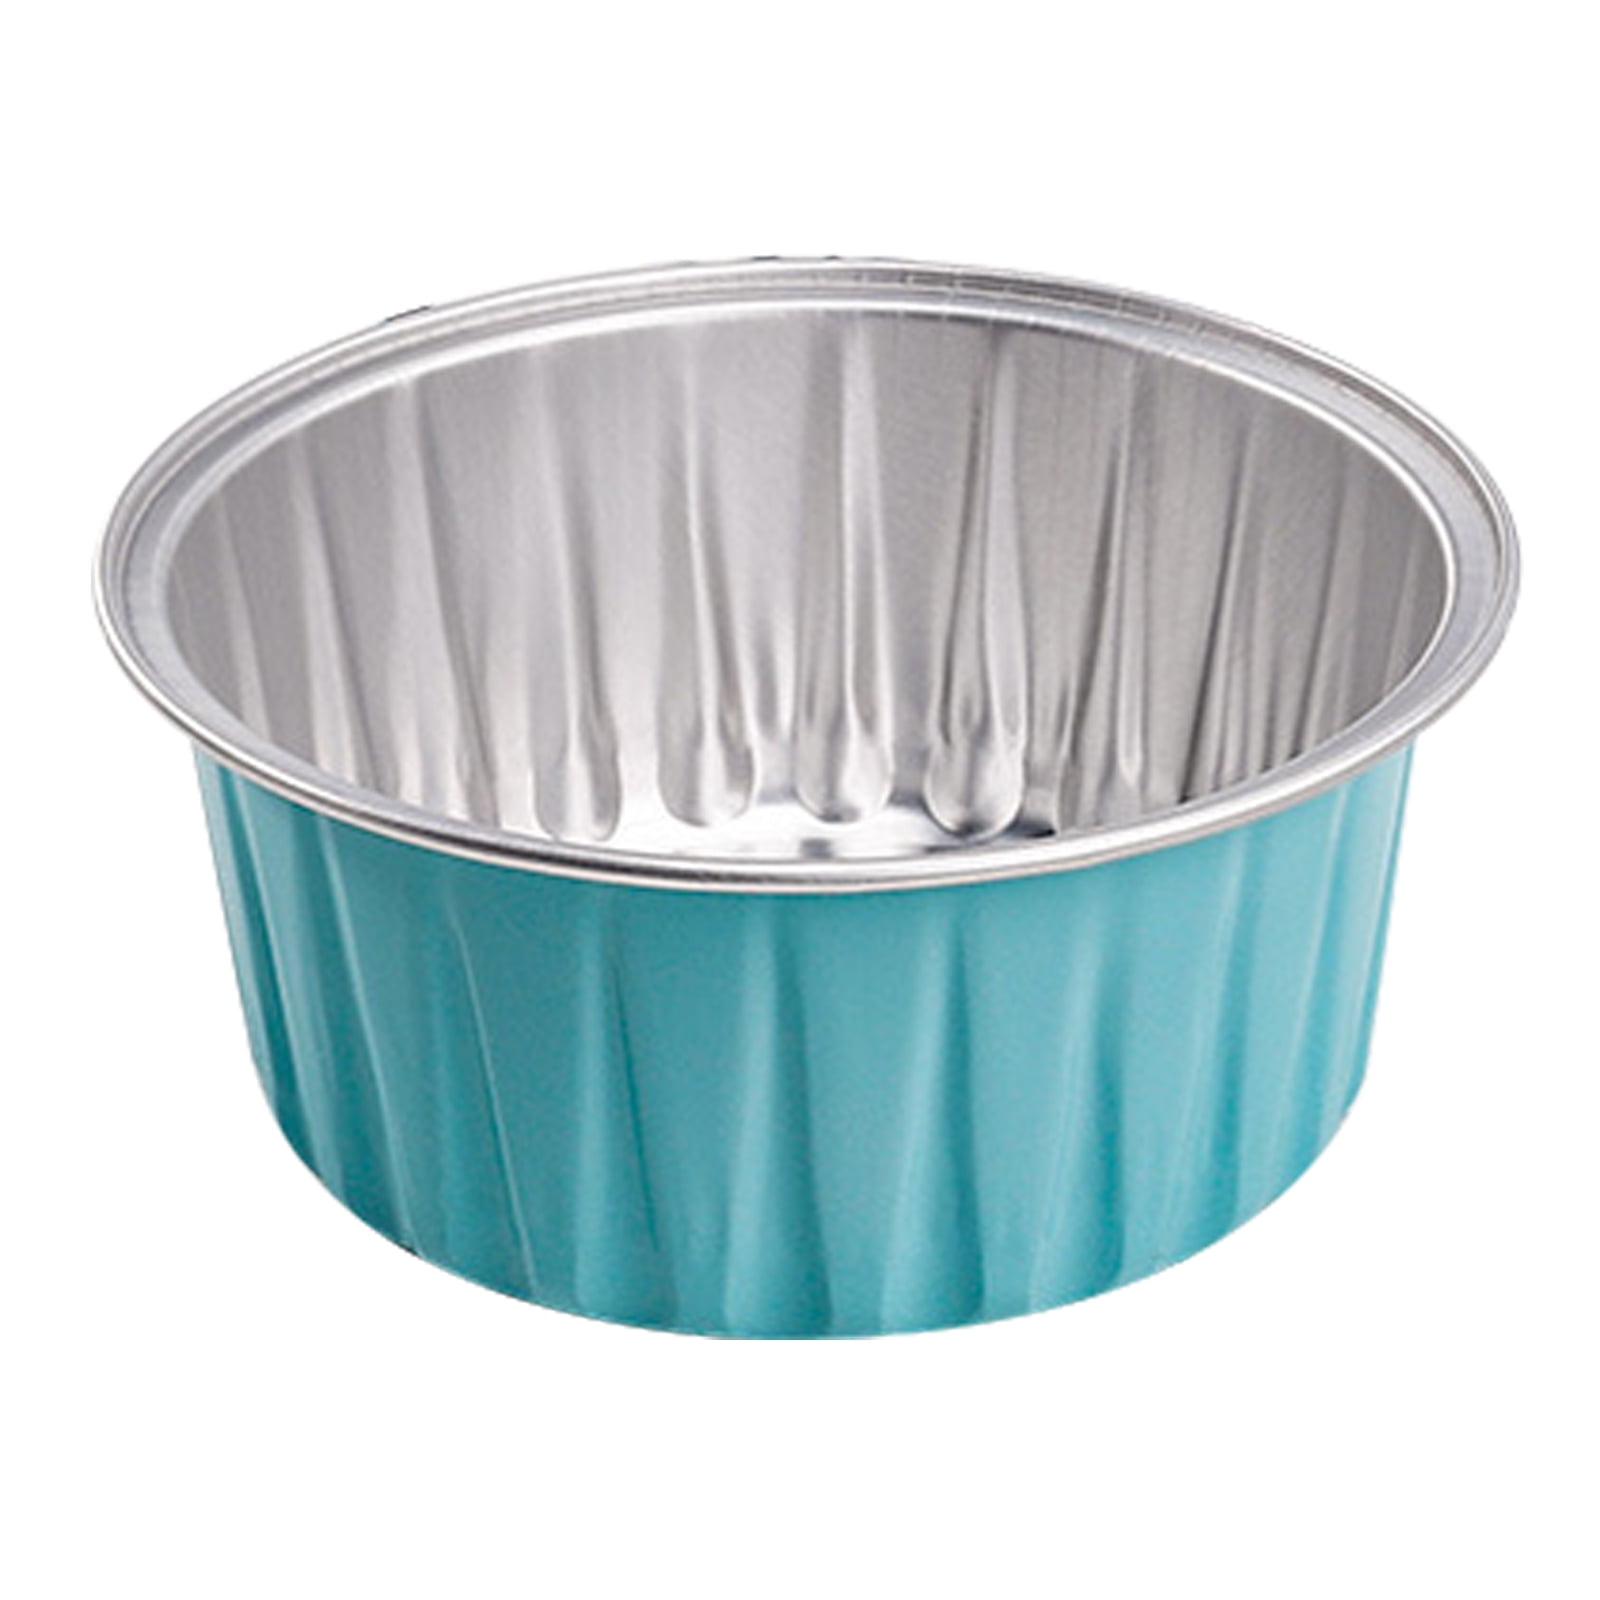 10pcs Aluminum Foil Cups For Air Fryers, Reusable Tin Foil Cups, Small  Disposable Baking Pans For Pies, Tarts And Cakes